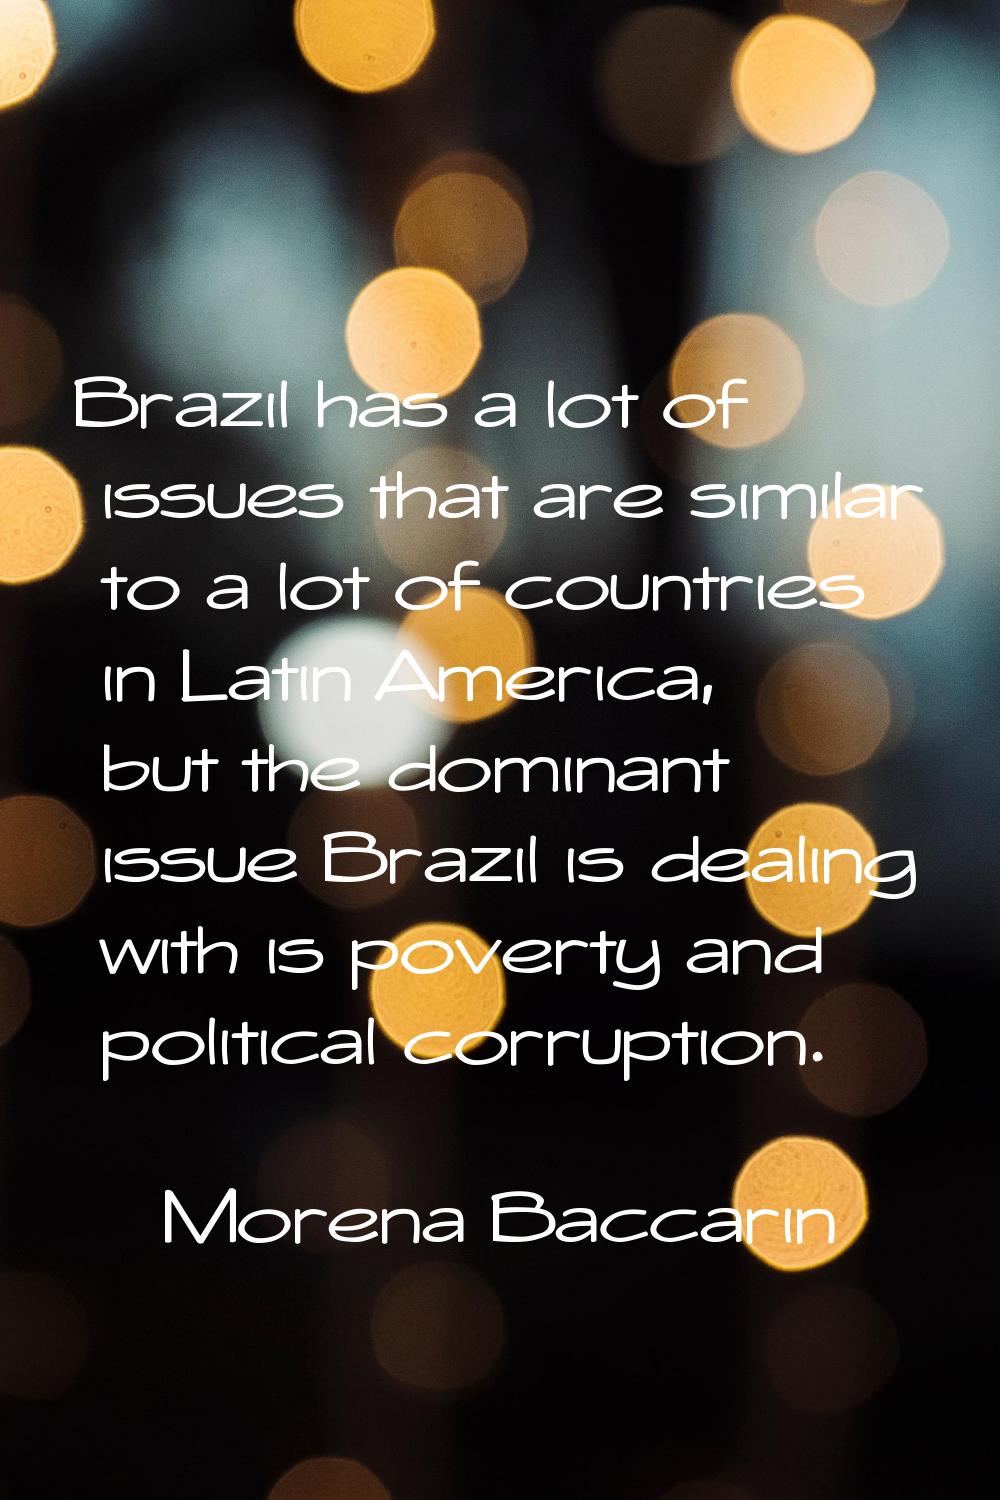 Brazil has a lot of issues that are similar to a lot of countries in Latin America, but the dominan